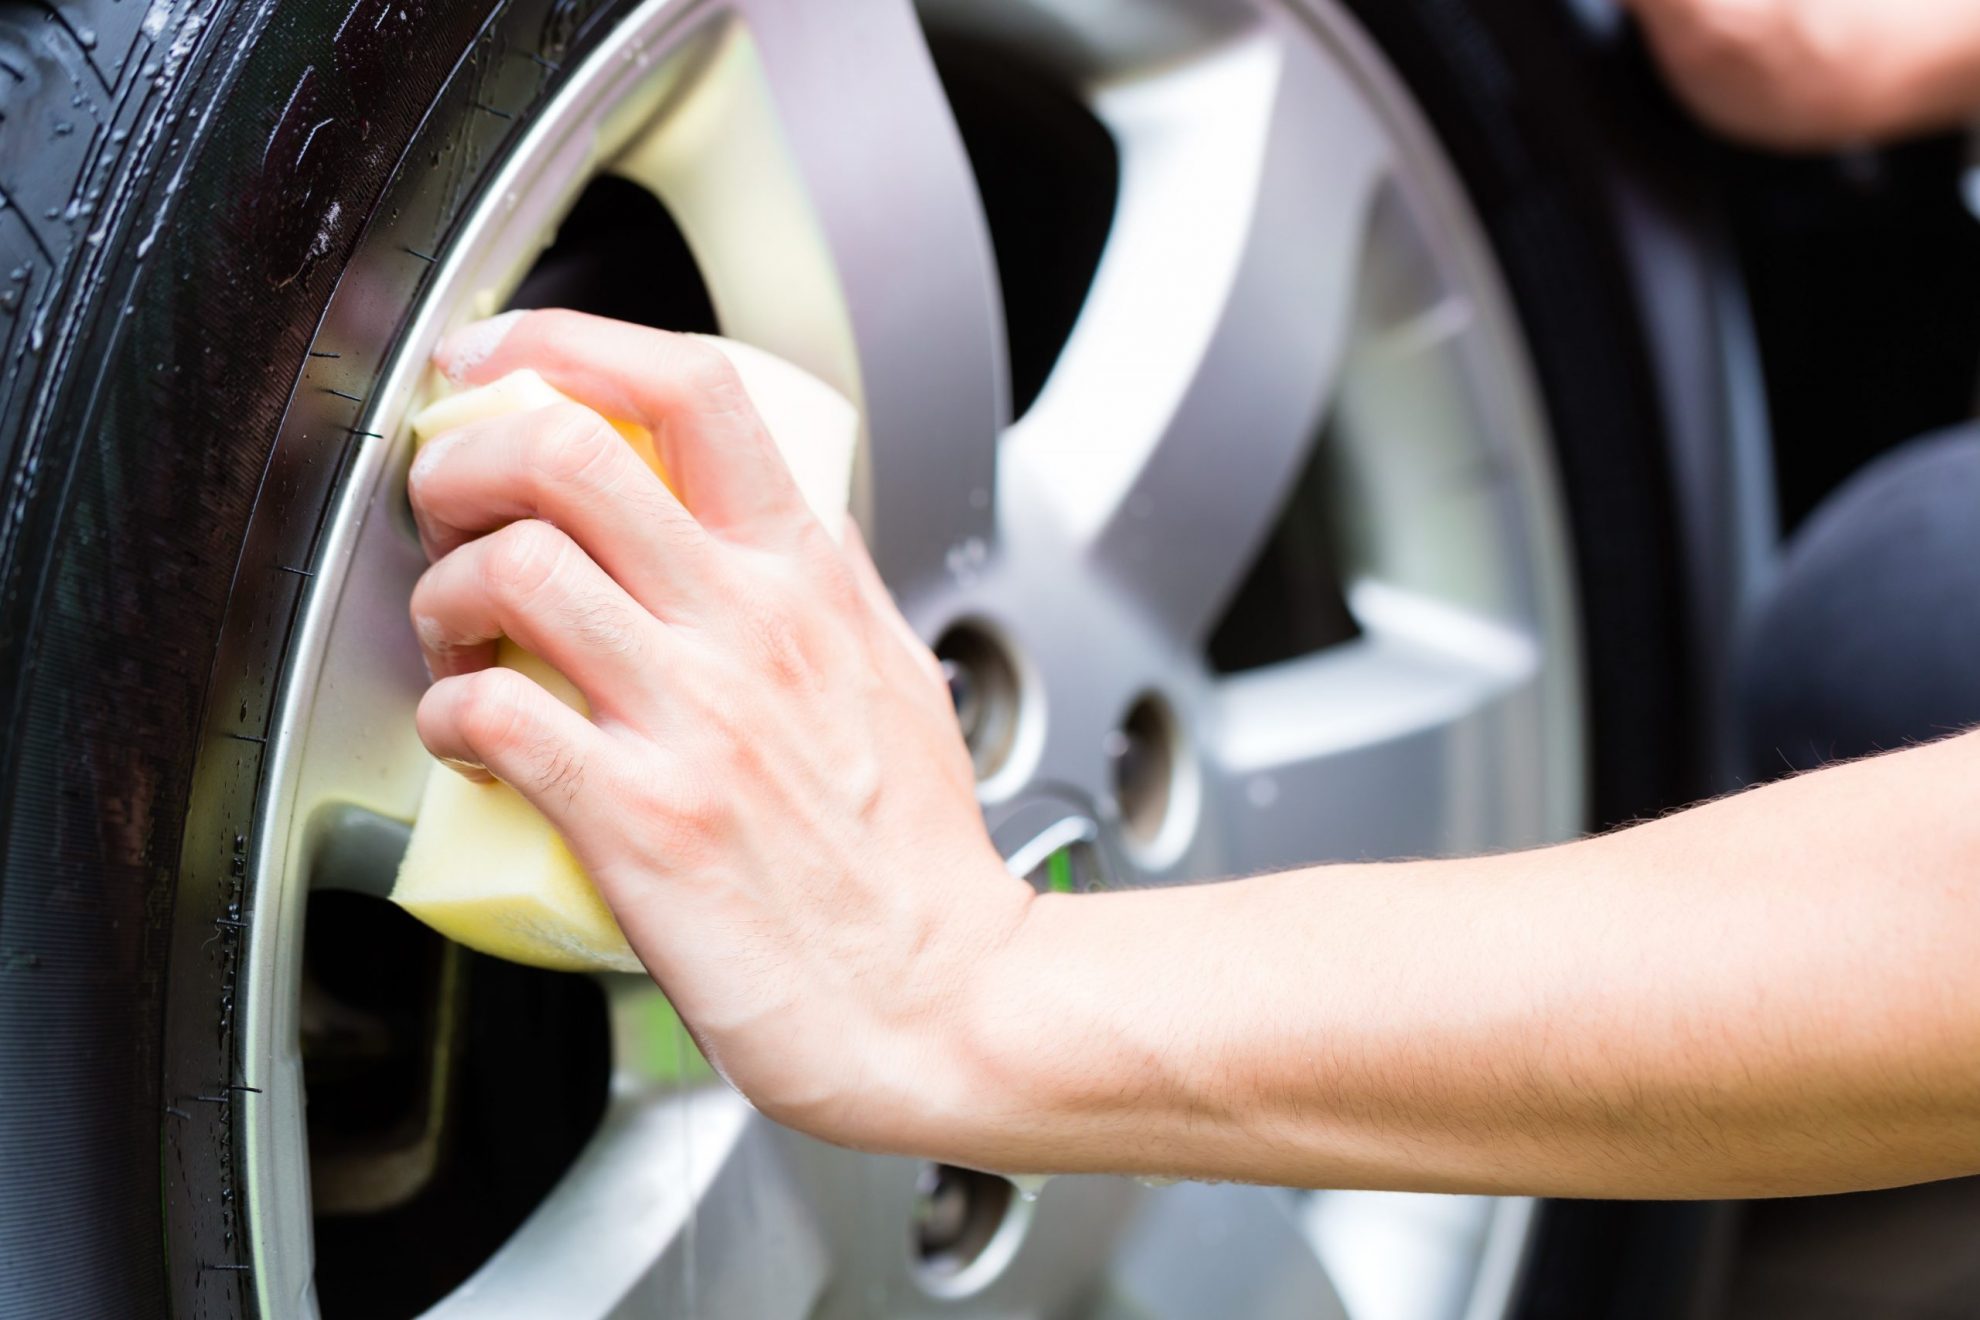 How To Clean Your Rims How to Clean Your Car Rims - Inland Empire Autobody & Paint Inc.